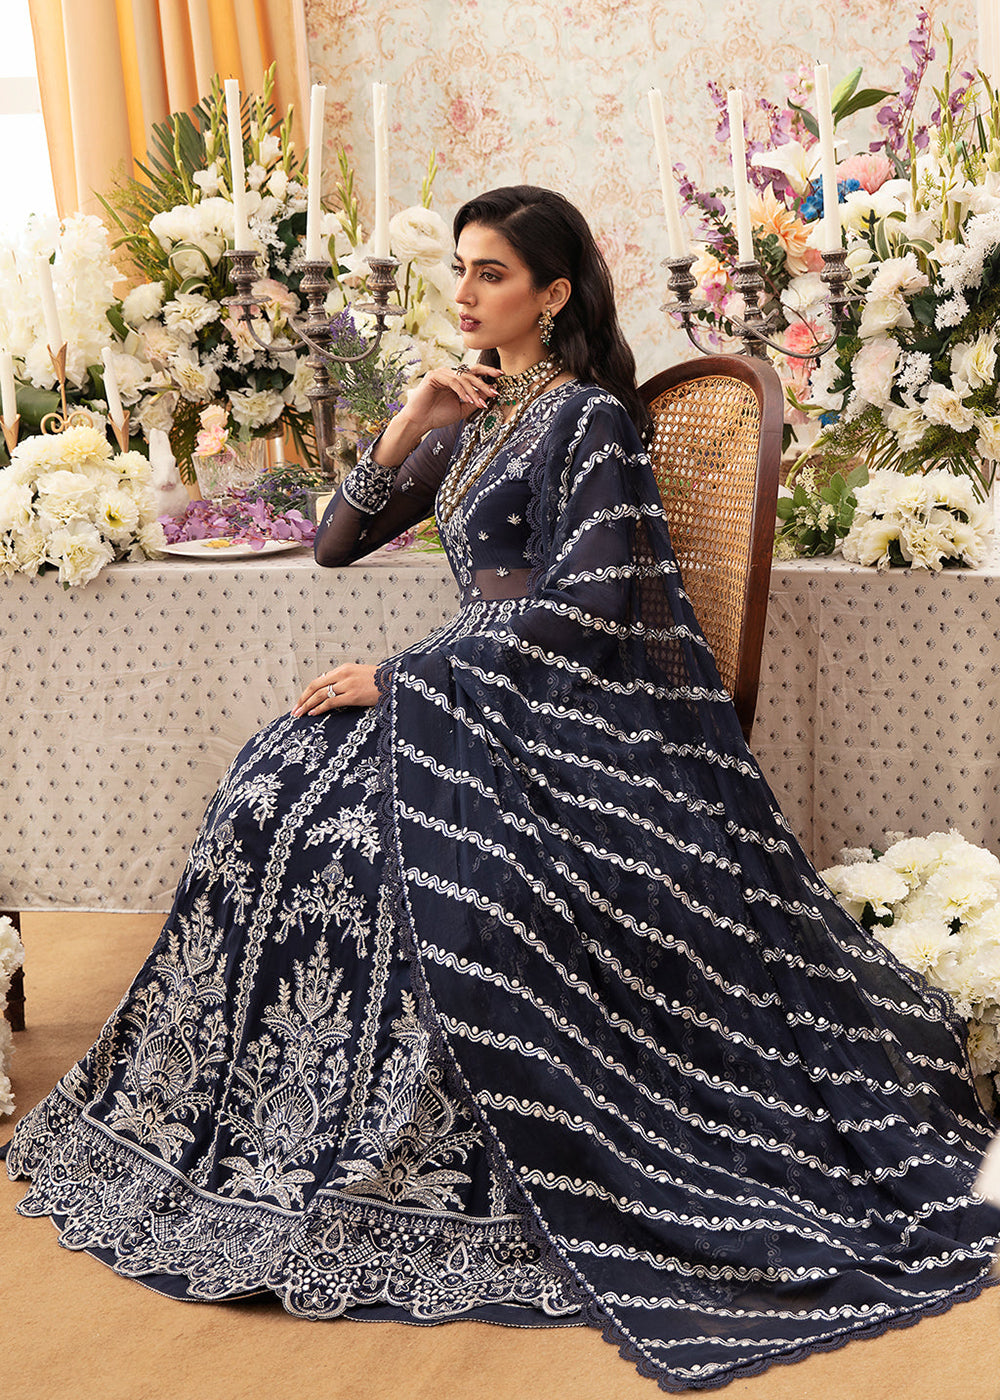 Buy Now The Whispers of Grandeur Luxury Formals '24 by Ayzel | HEMAYAL Online at Empress Online in USA, UK, Canada & Worldwide at Empress Clothing. 